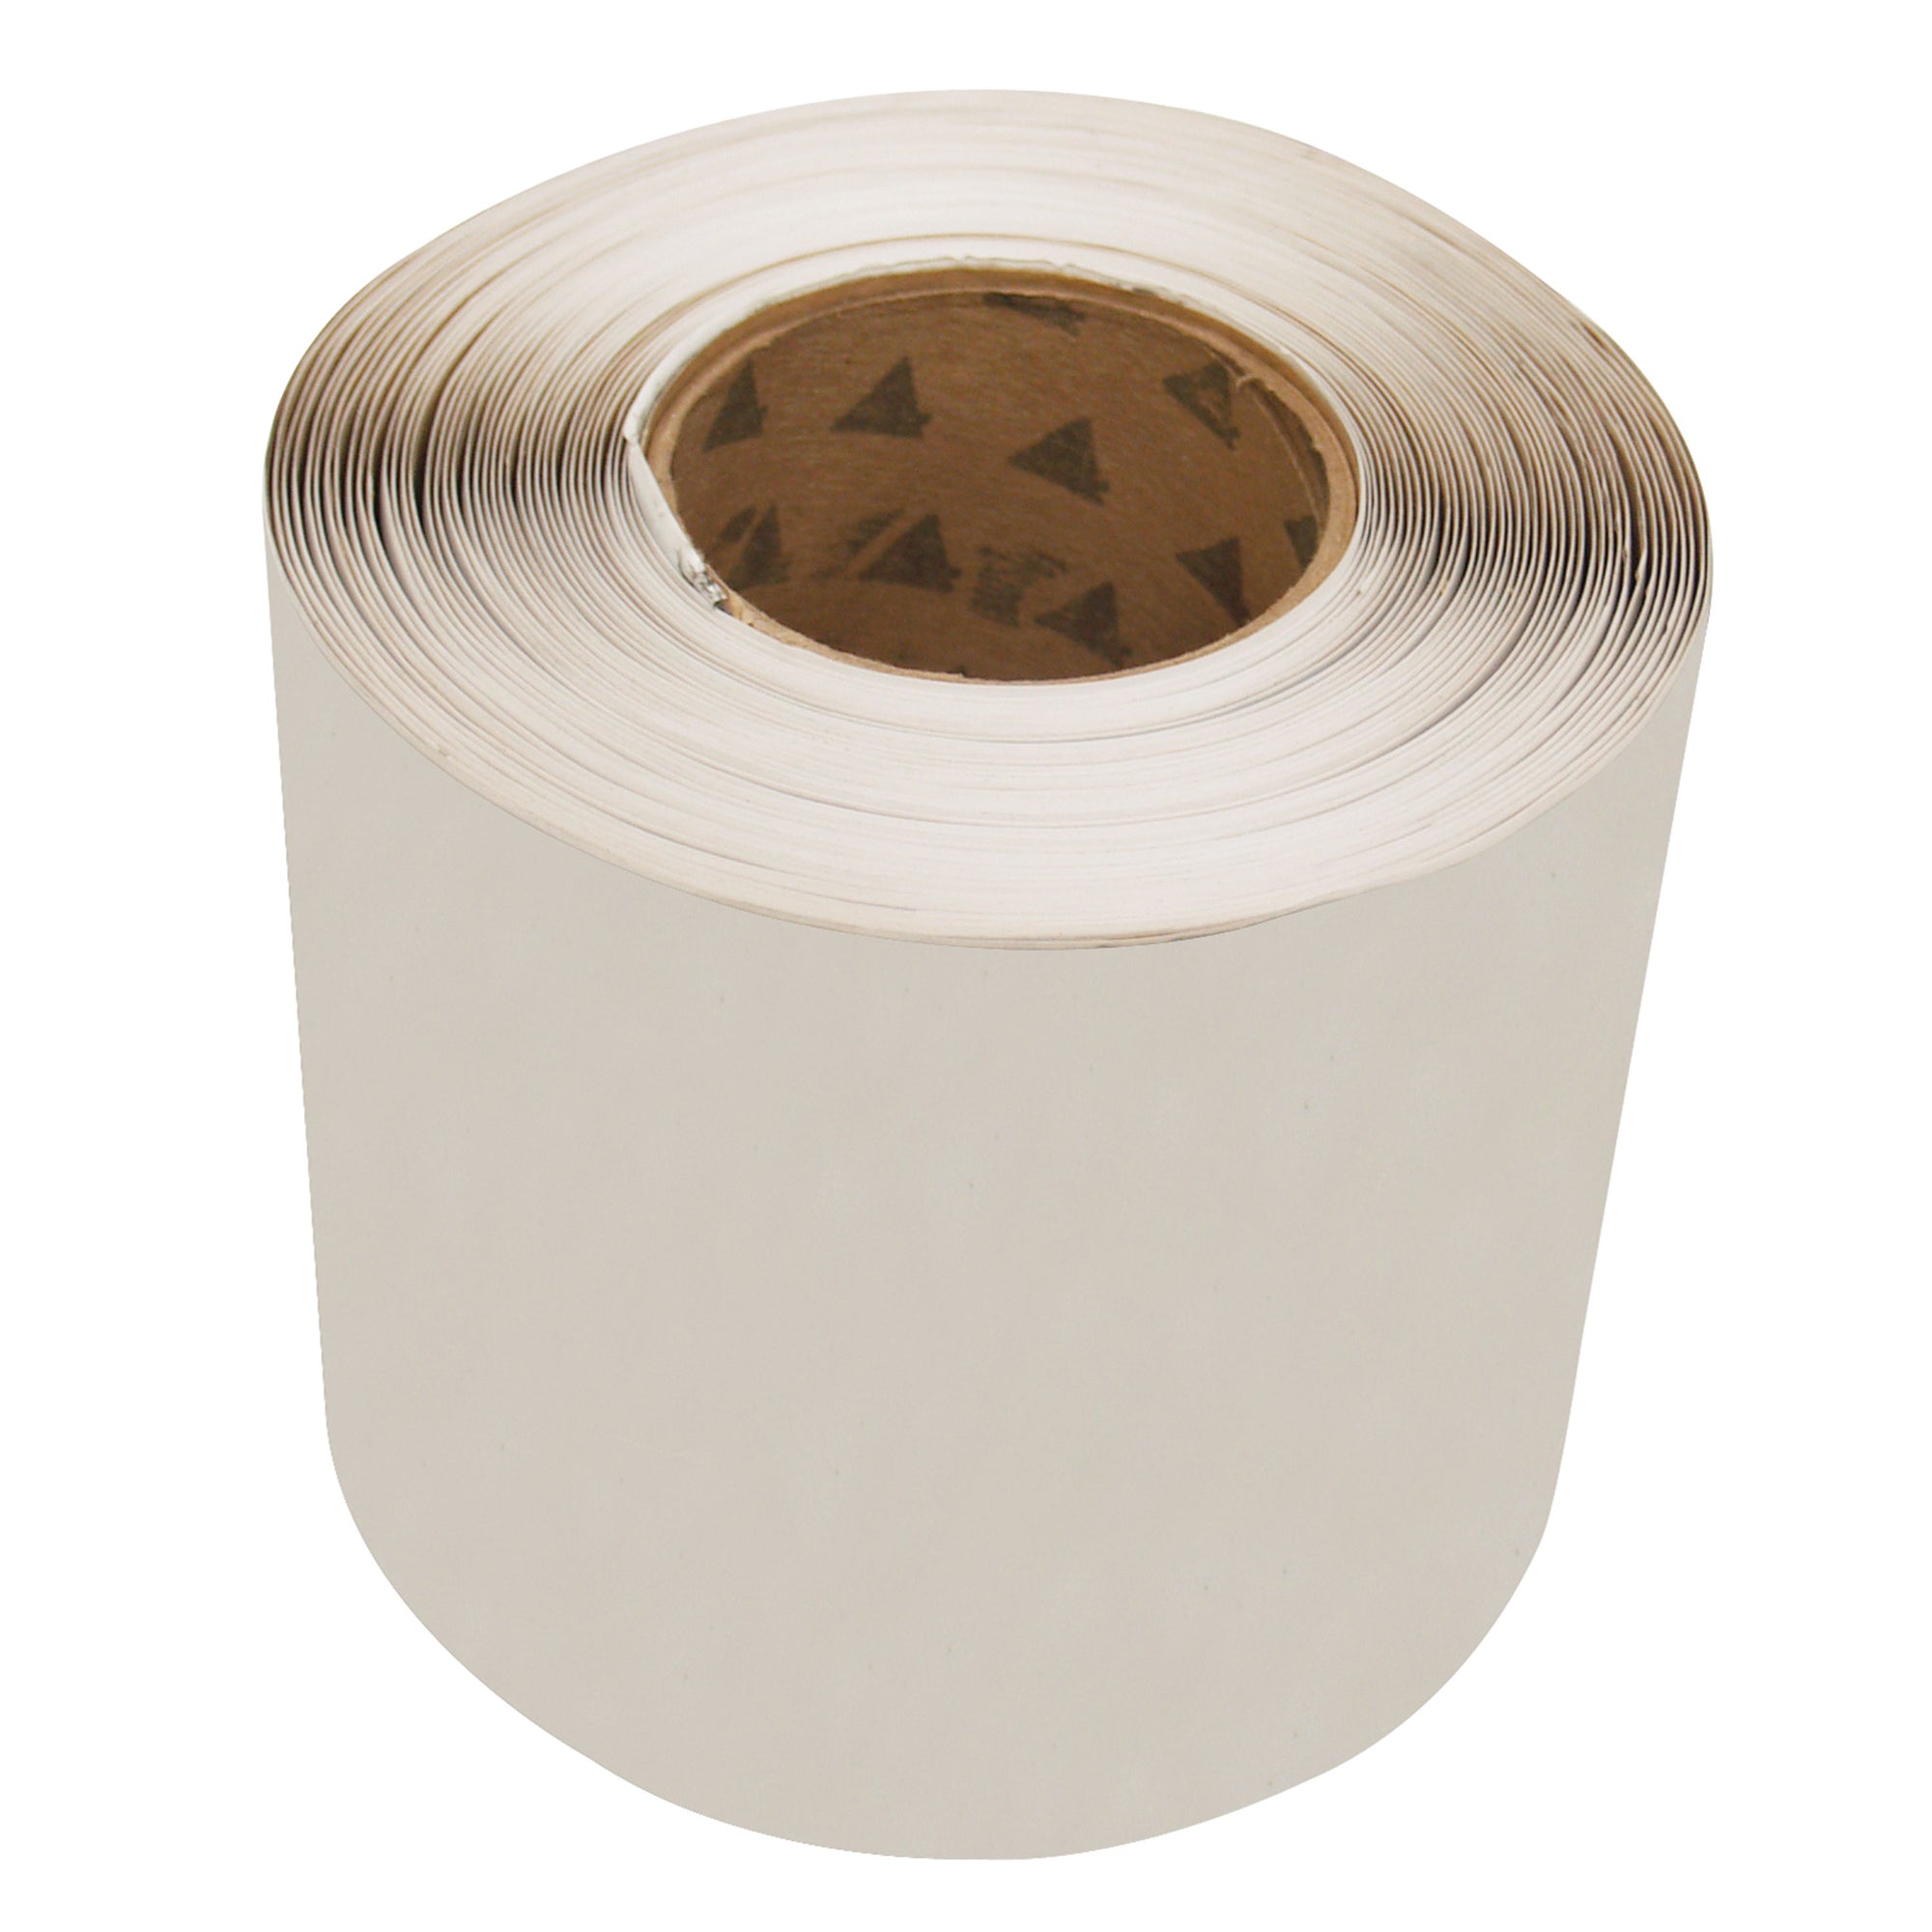 AP Products 017-404033 Sika Multiseal Plus Tape - 6" x 50' Roll